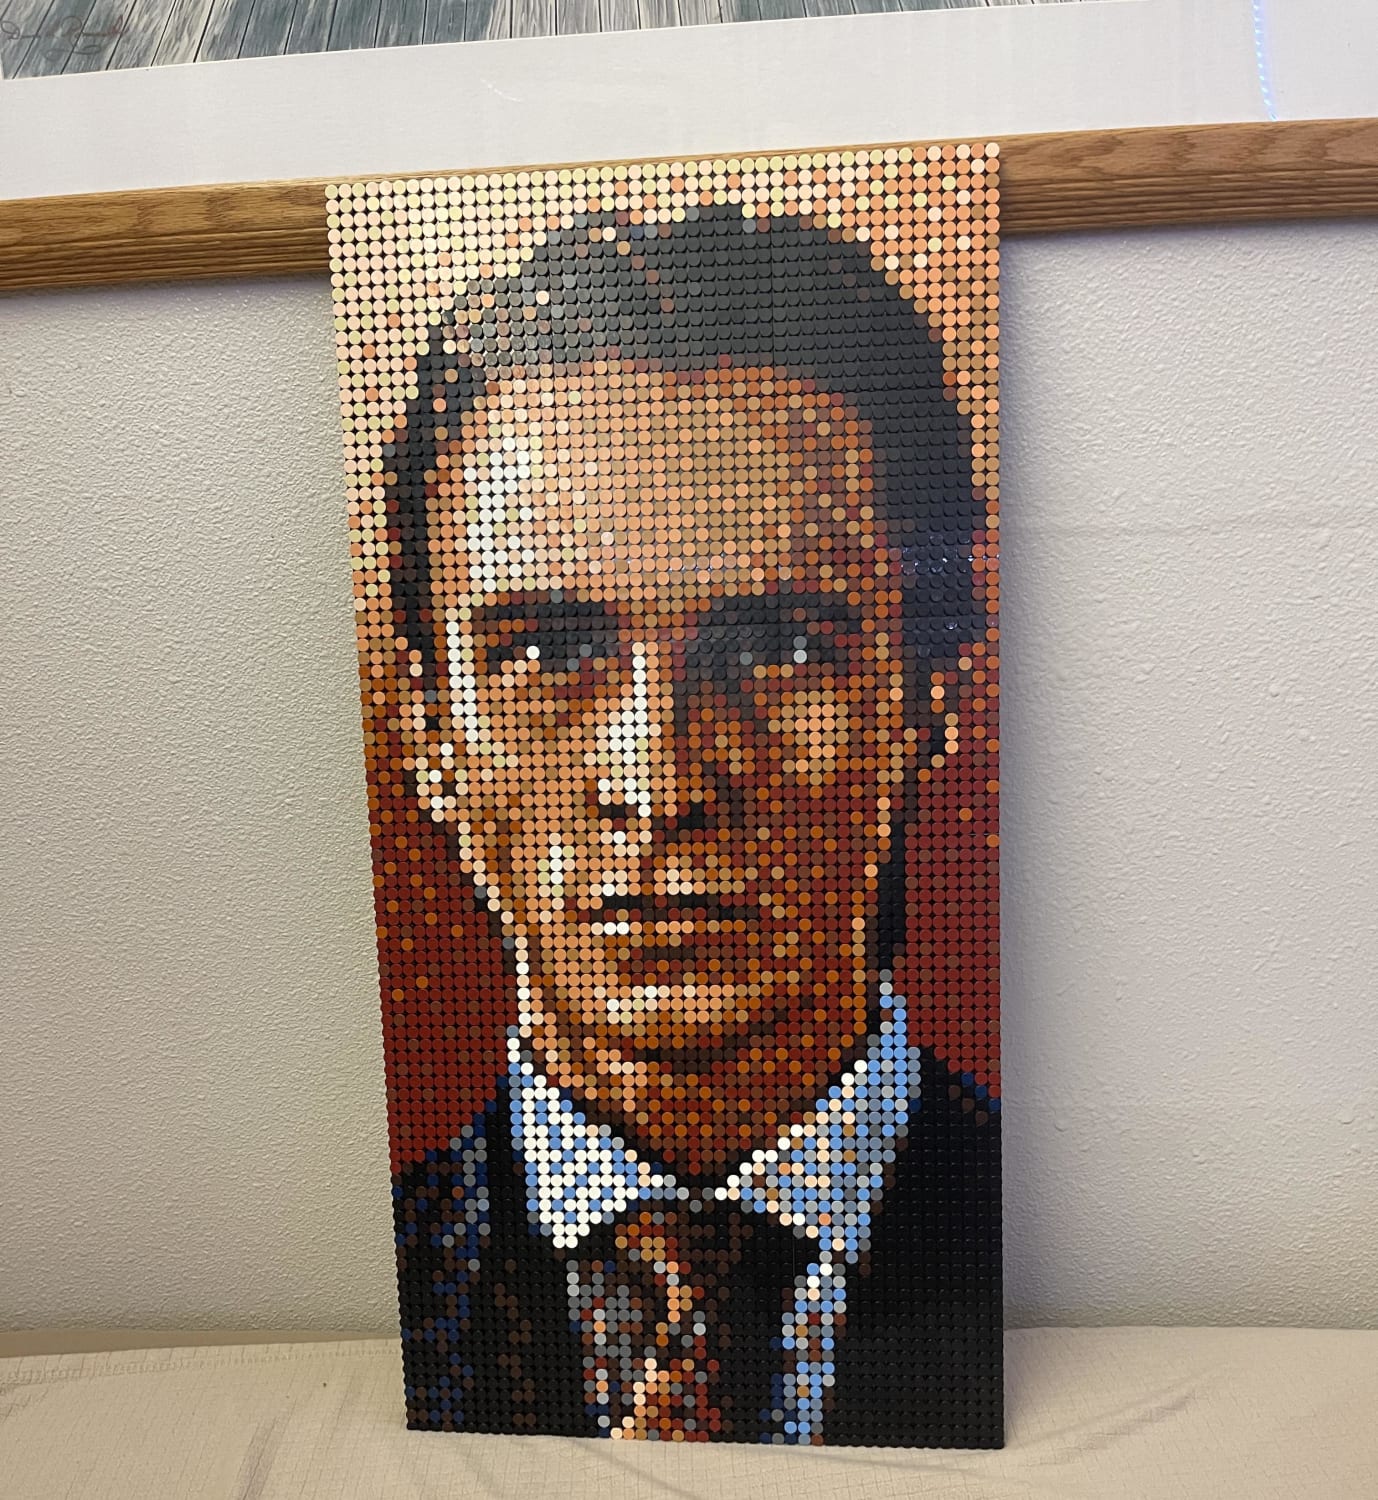 A Lego mosaic of American Psycho I was working on….